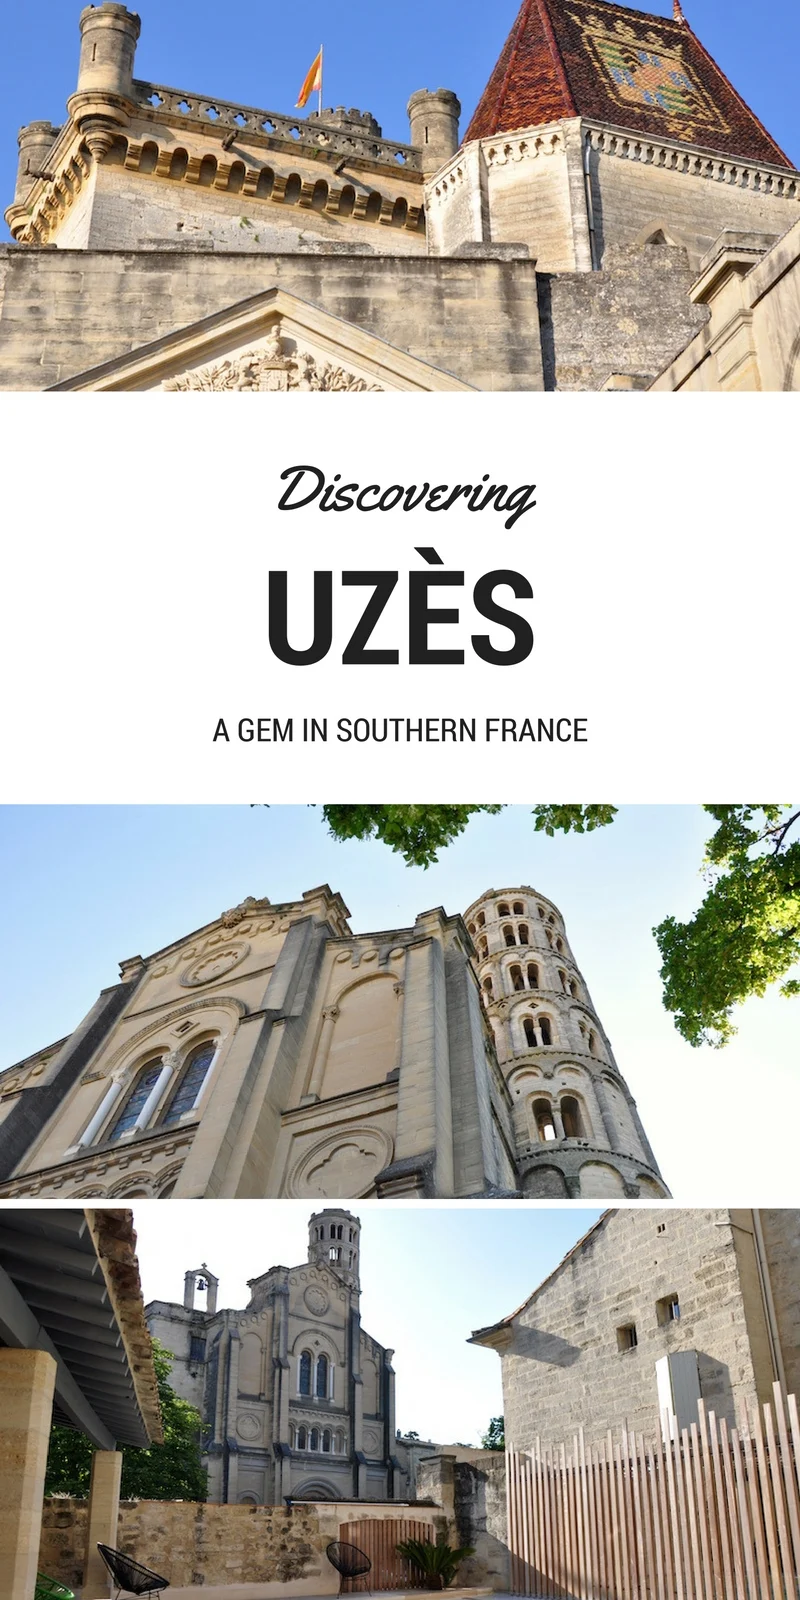 Discovering Uzès, a picture-perfect town in Southern France